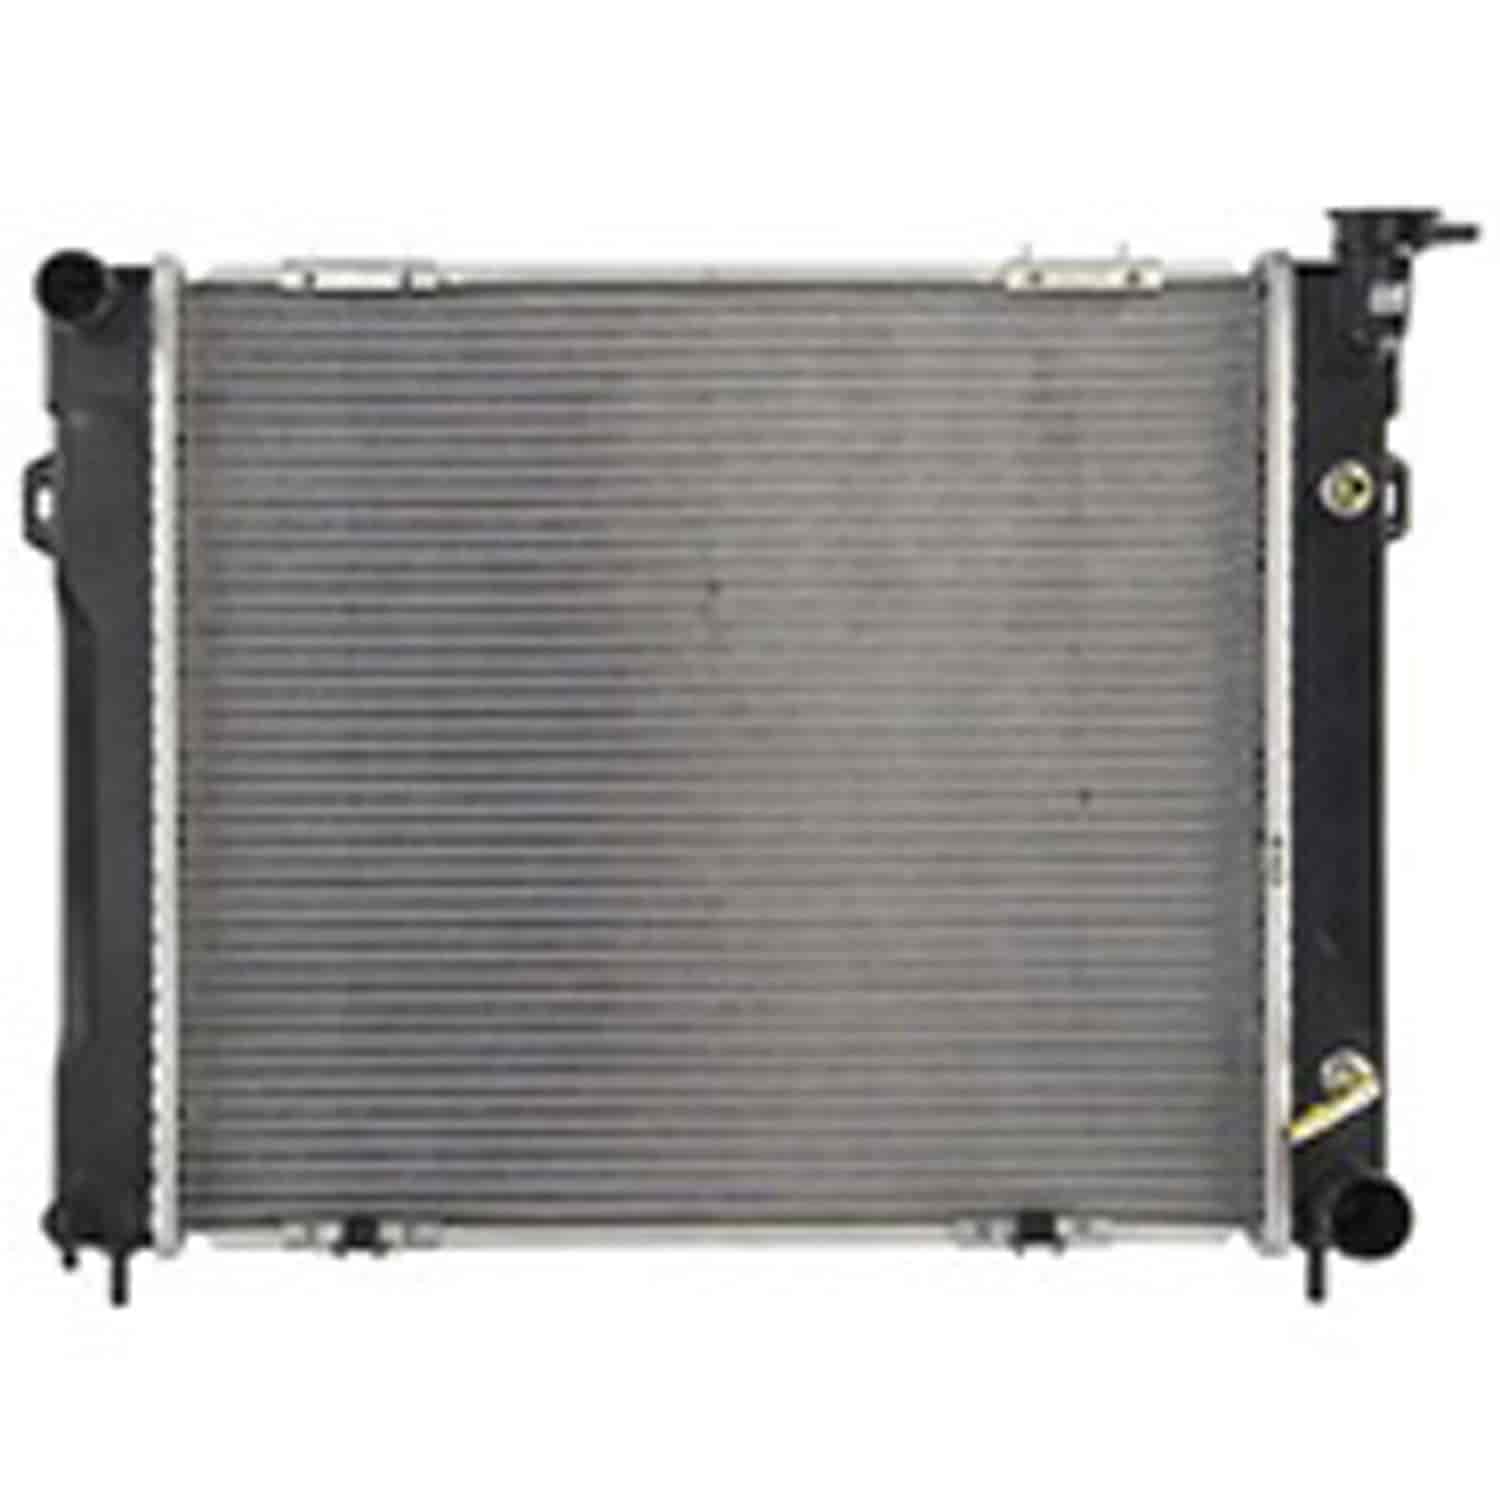 This 1 row radiator from Omix-ADA fits 93-97 Grand Cherokee 5.2L and 5.9L With or Without AC MT or AT .